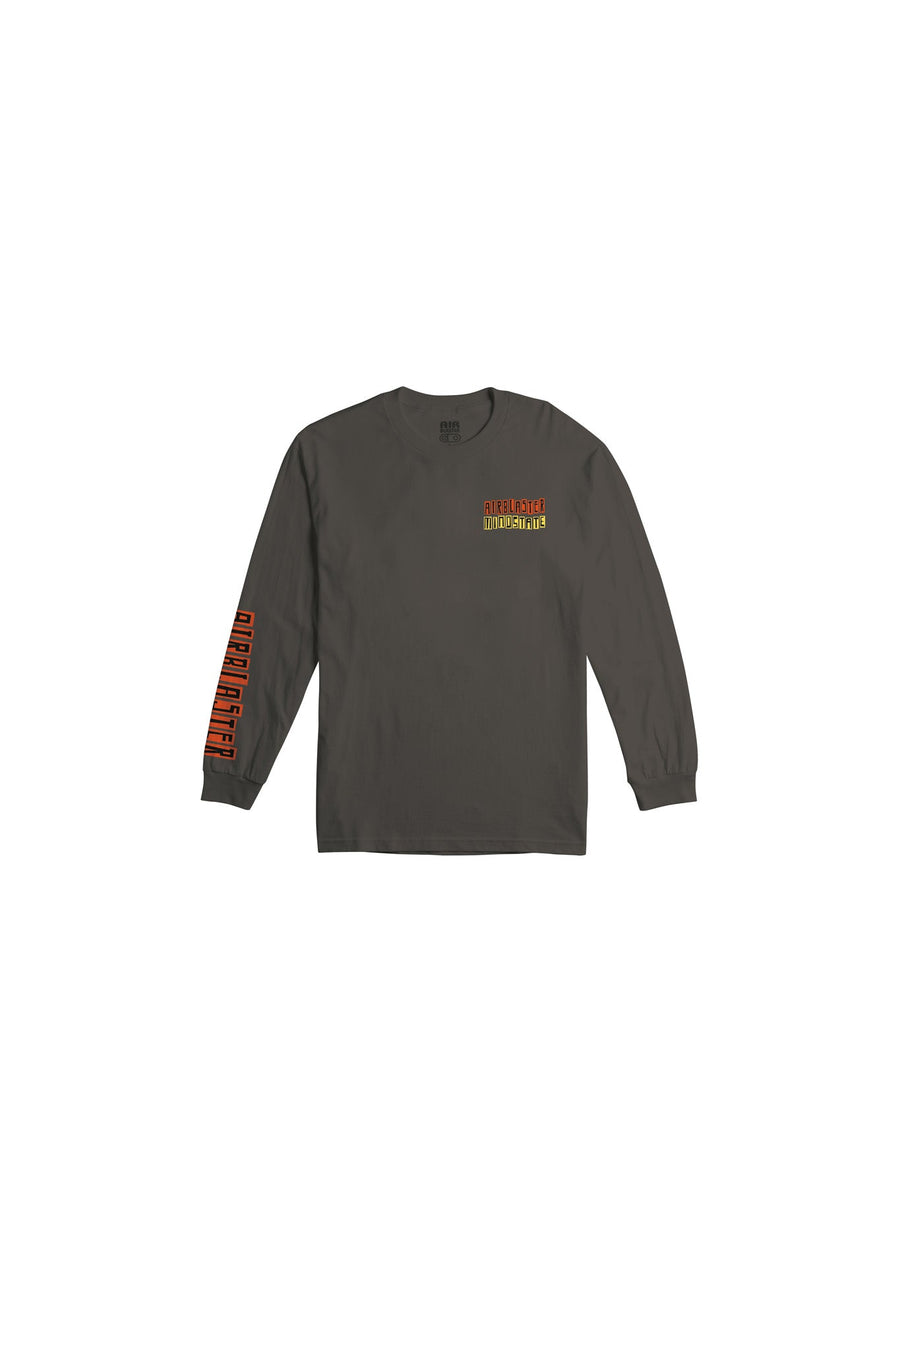 Airblaster Mentality Long Sleeve T Shirt in Charcoal 2023